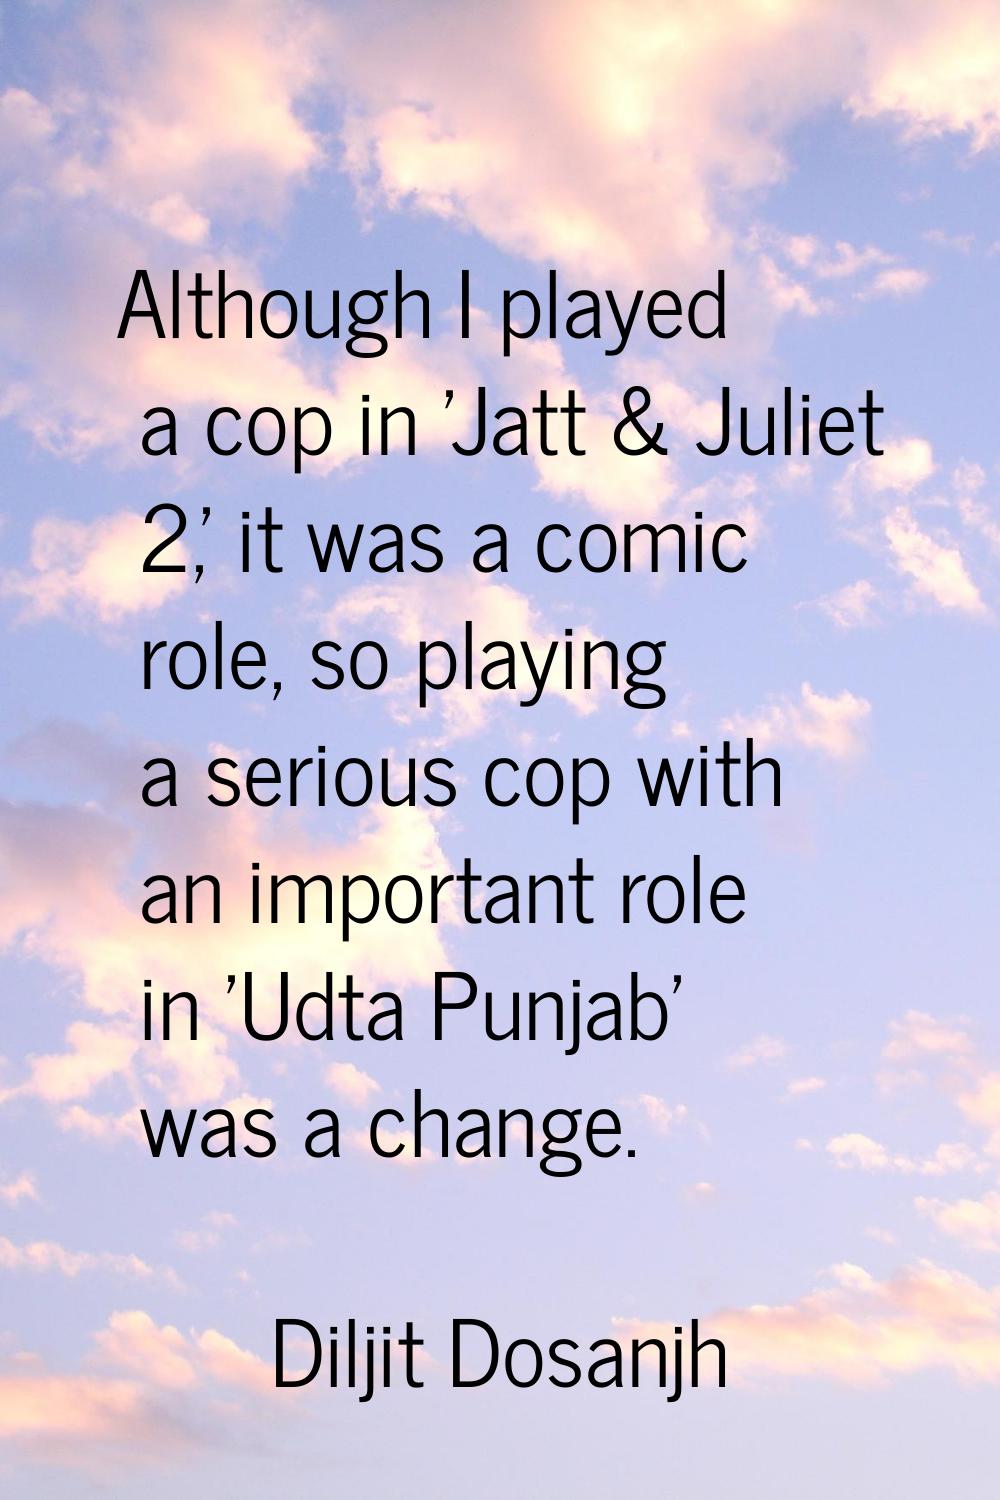 Although I played a cop in 'Jatt & Juliet 2,' it was a comic role, so playing a serious cop with an